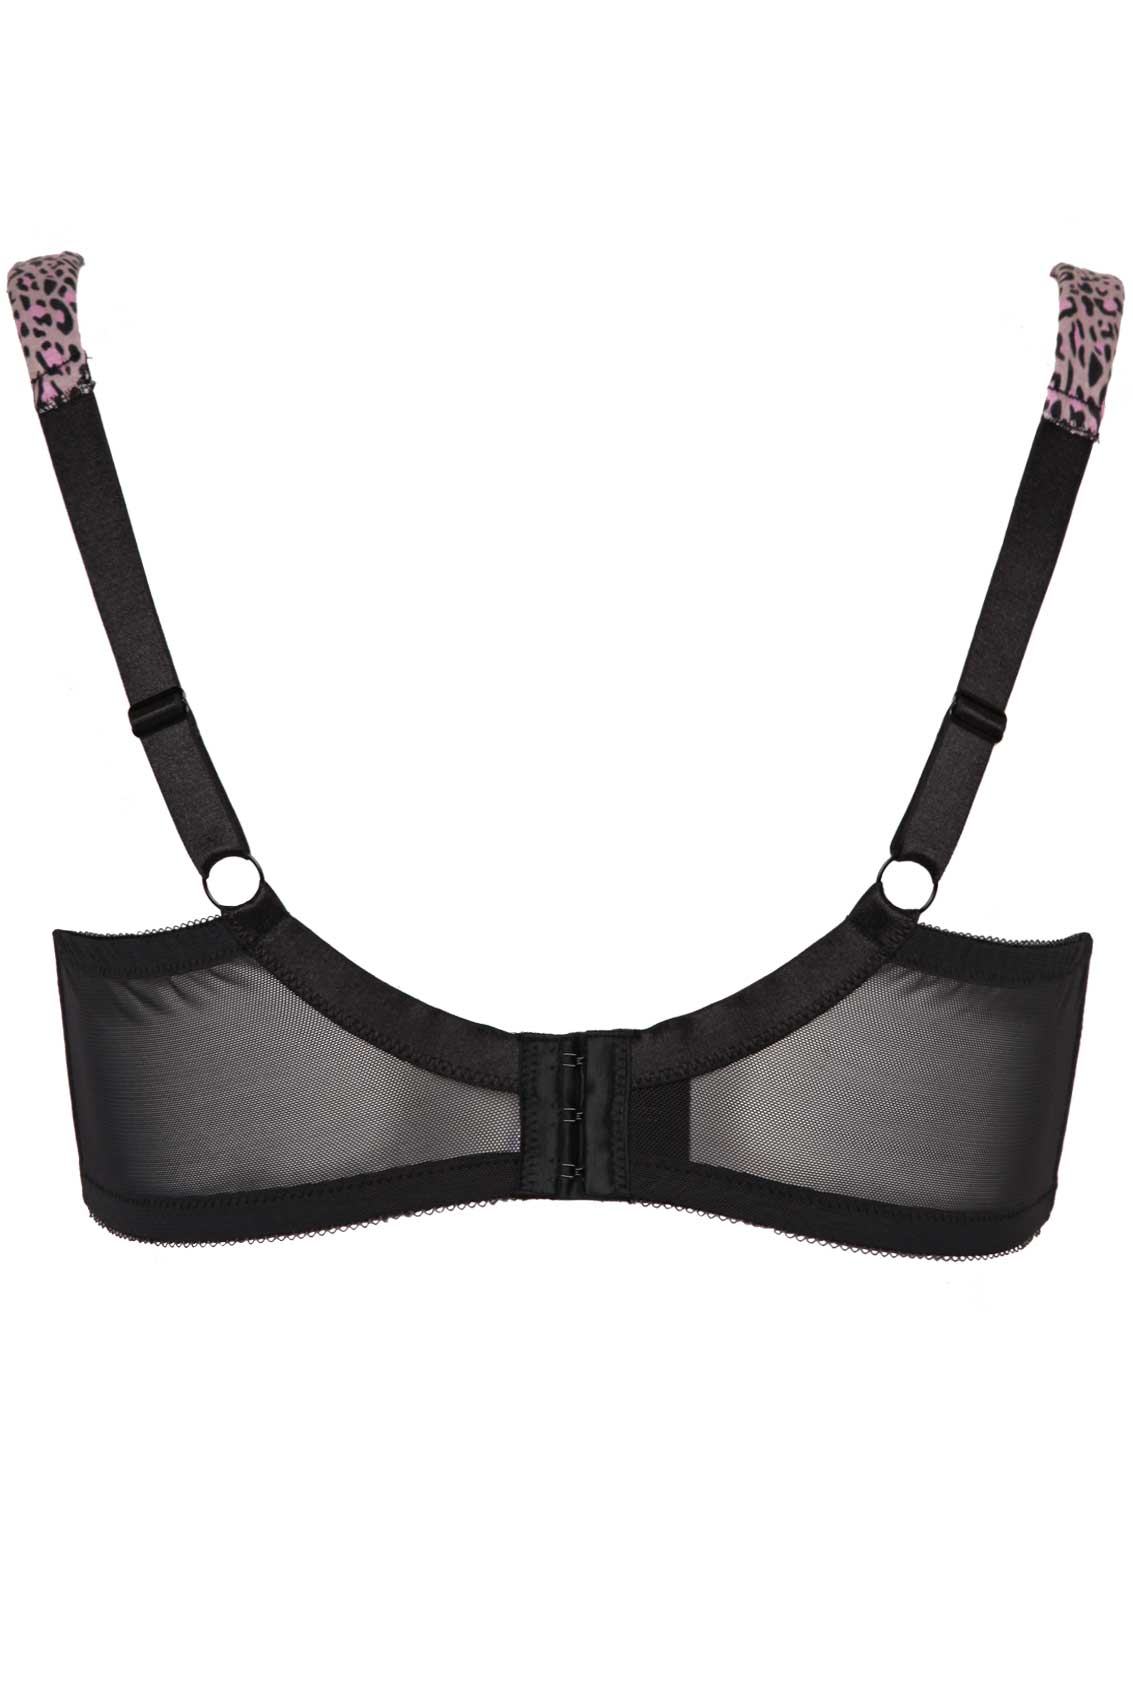 Black & Pink Animal Print Non-Wired Soft Cup Bra With Lace plus size ...